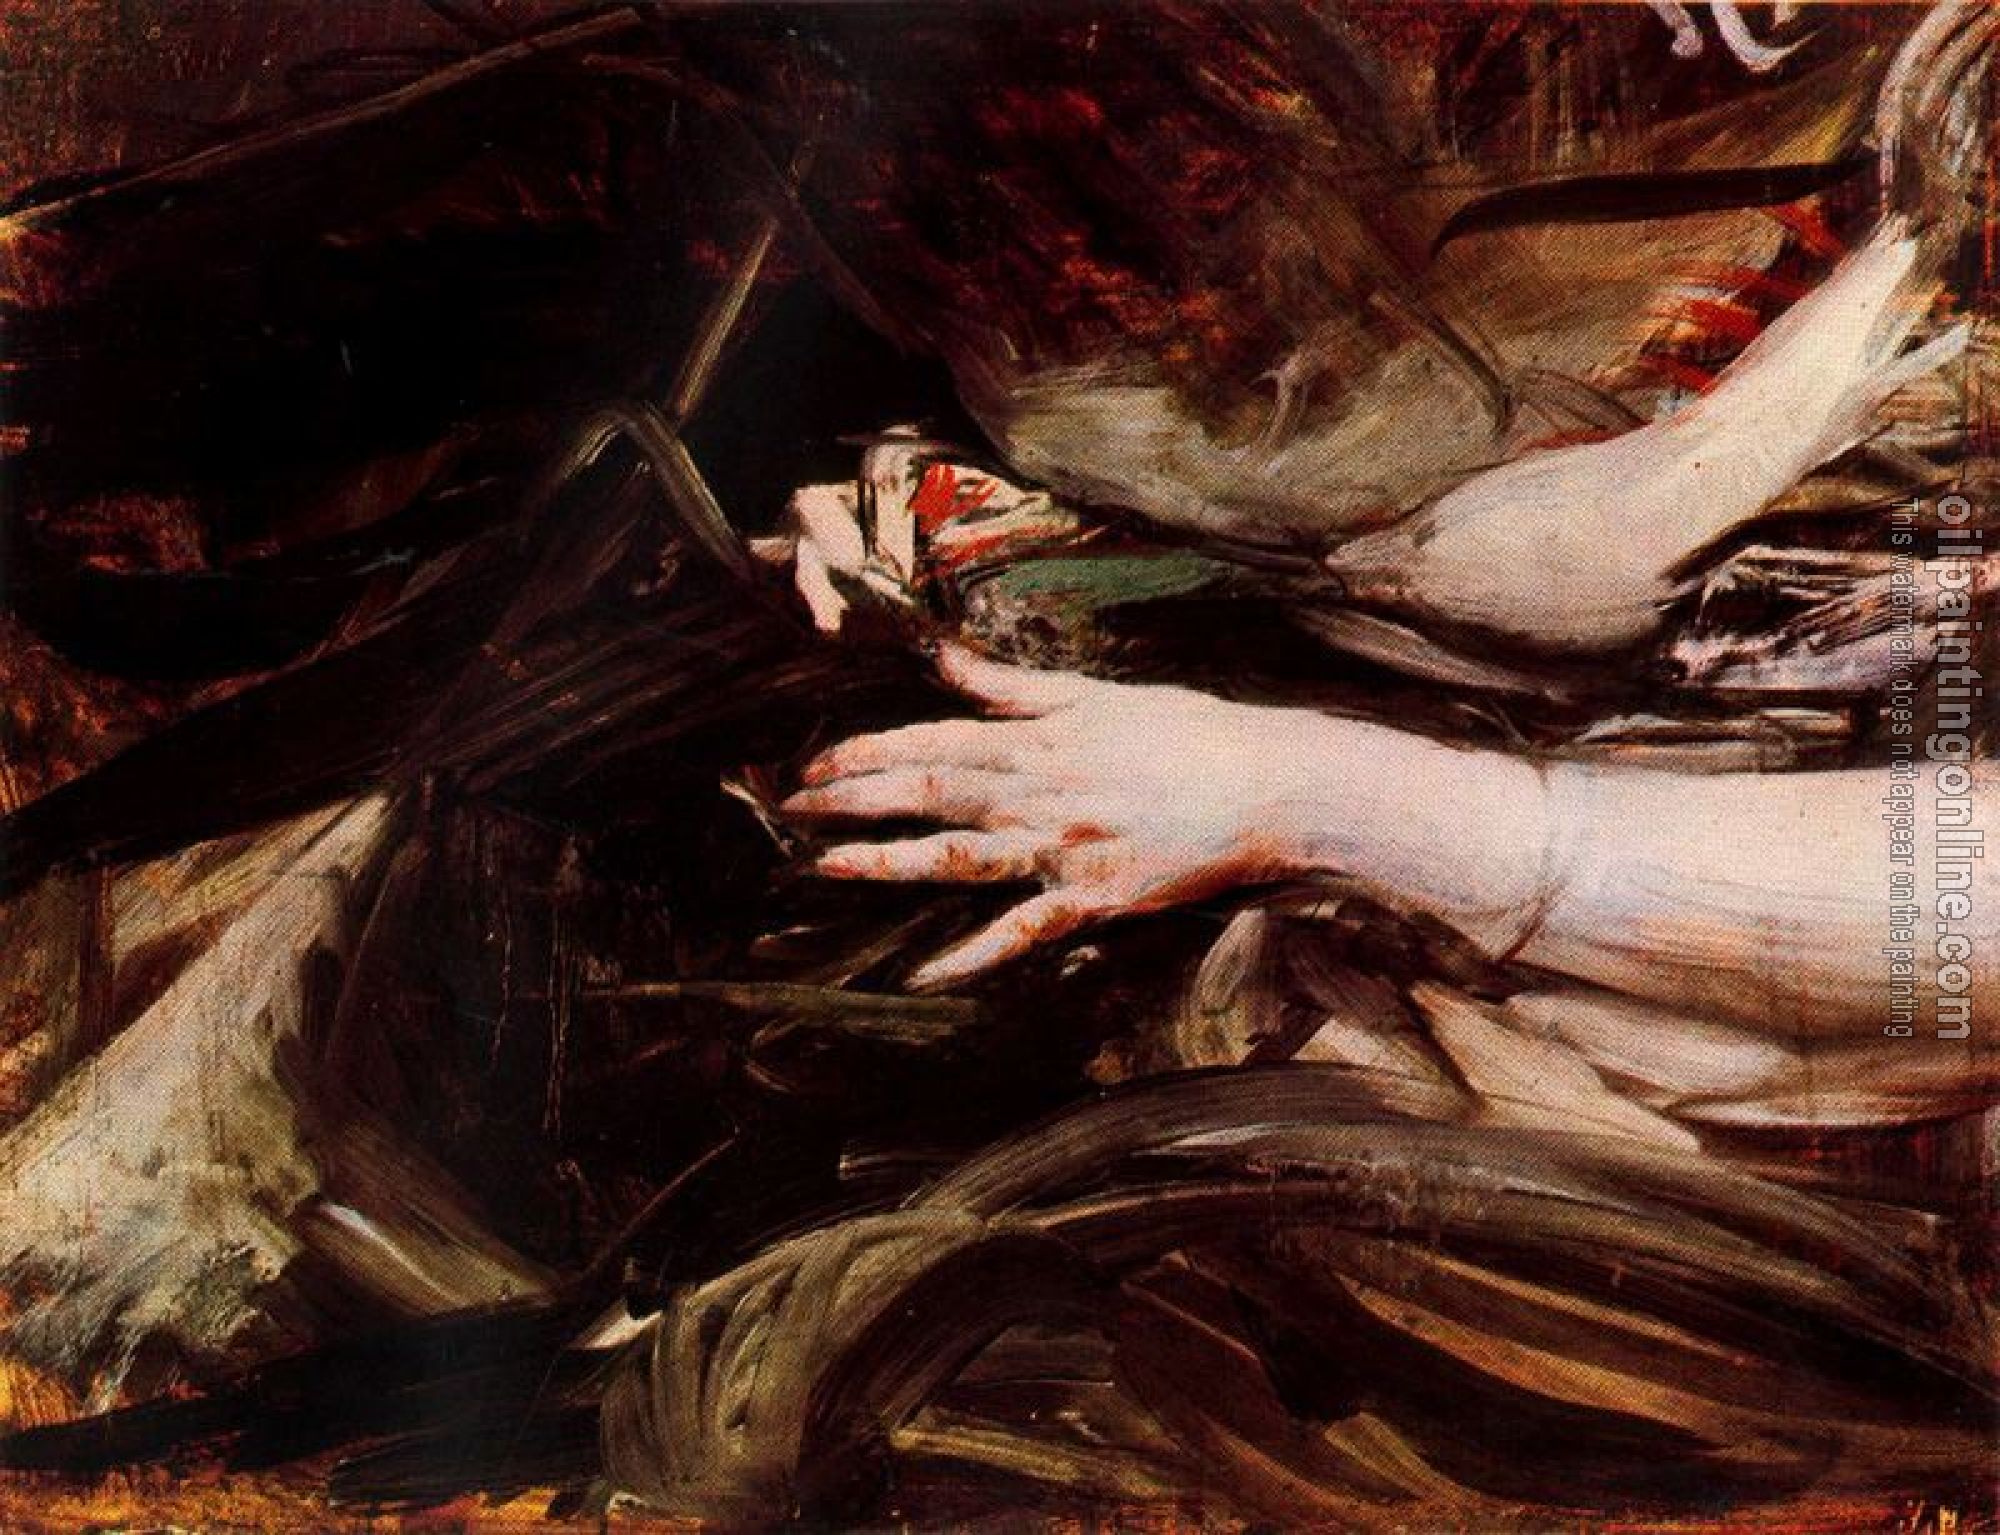 Giovanni Boldini - Sewing Hands of a Woman